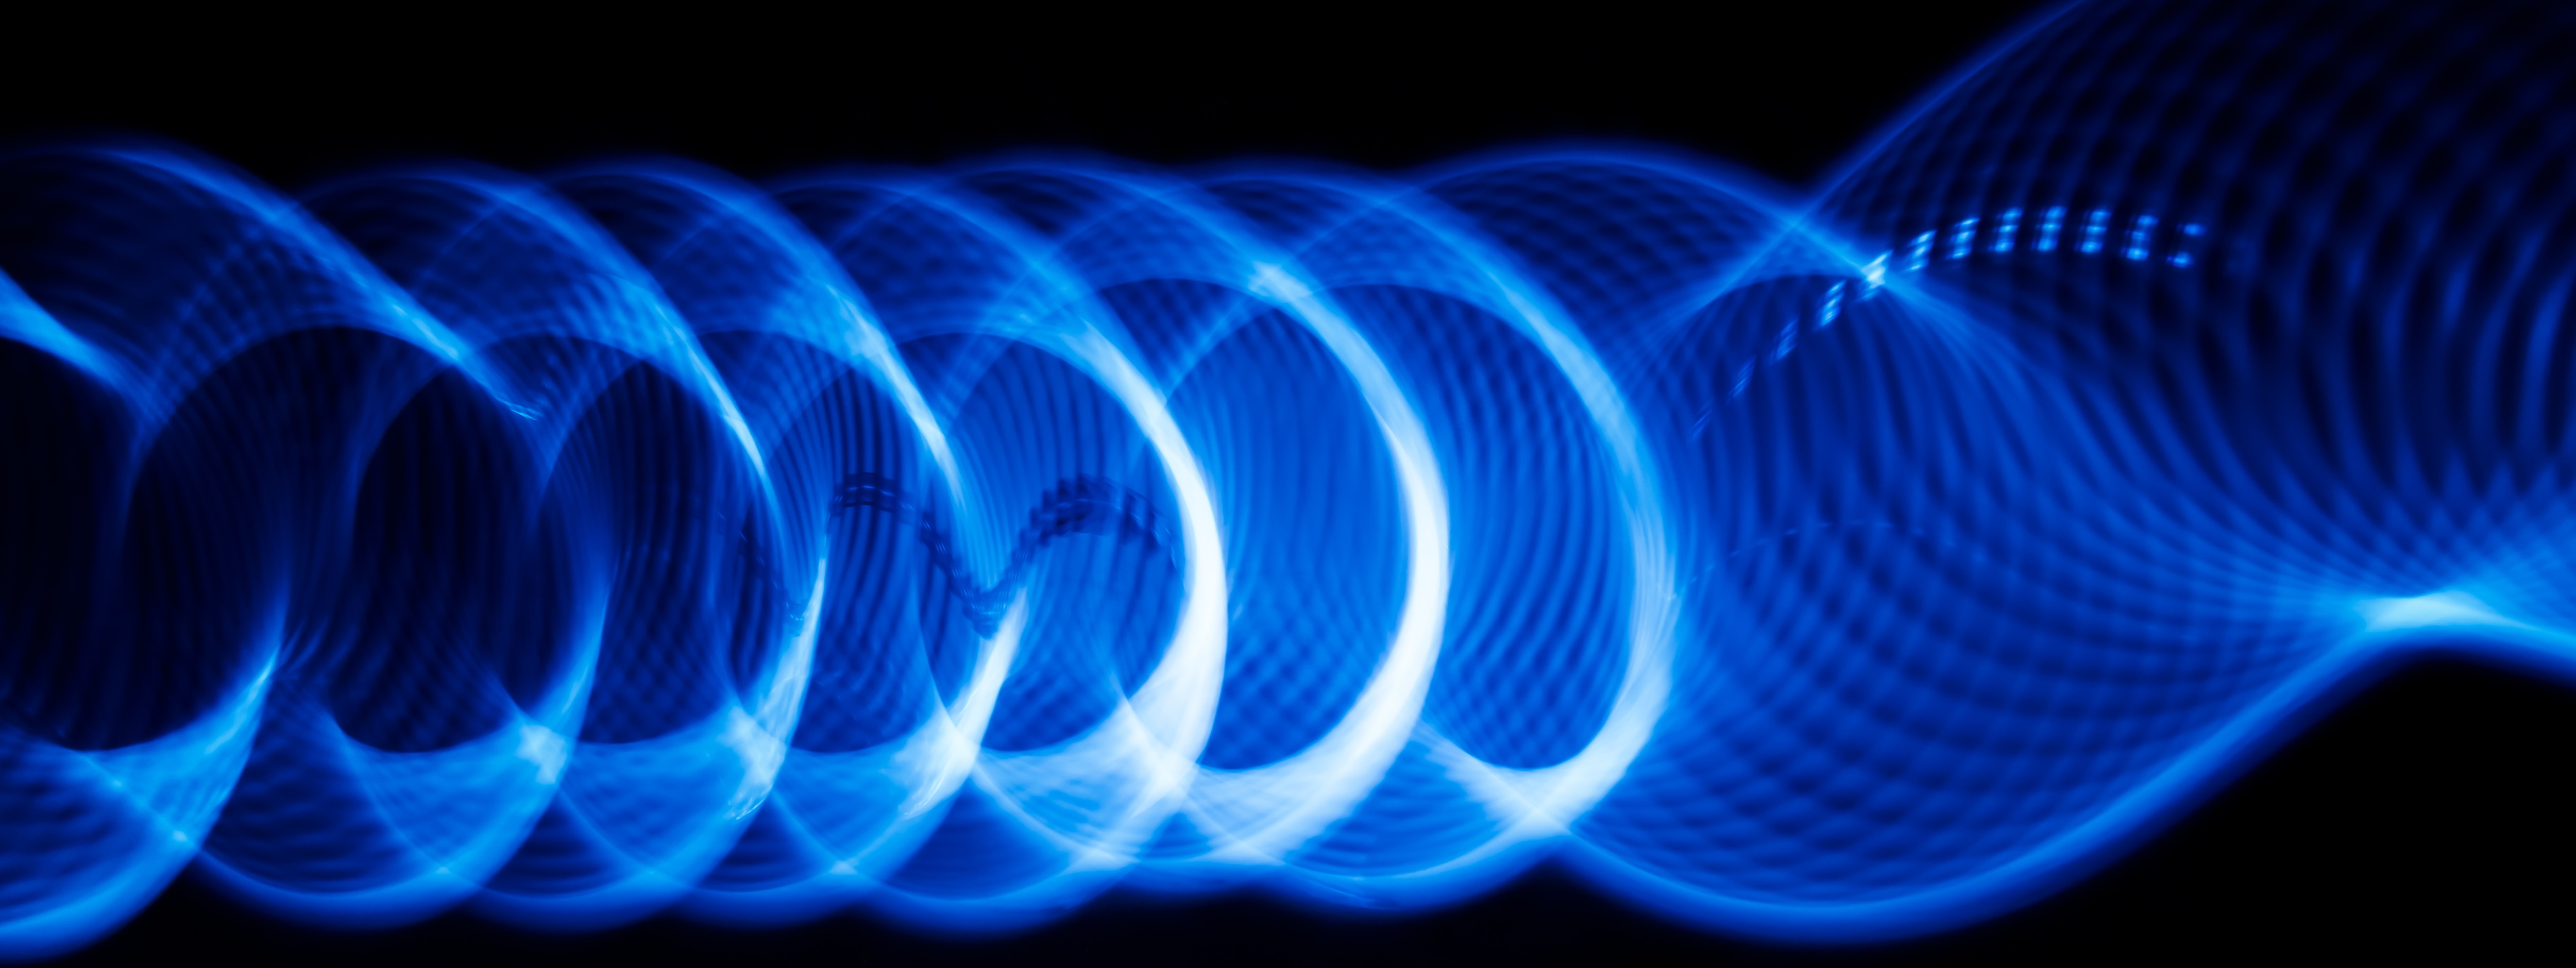 light-sound-action-extending-the-life-of-acoustic-waves-on